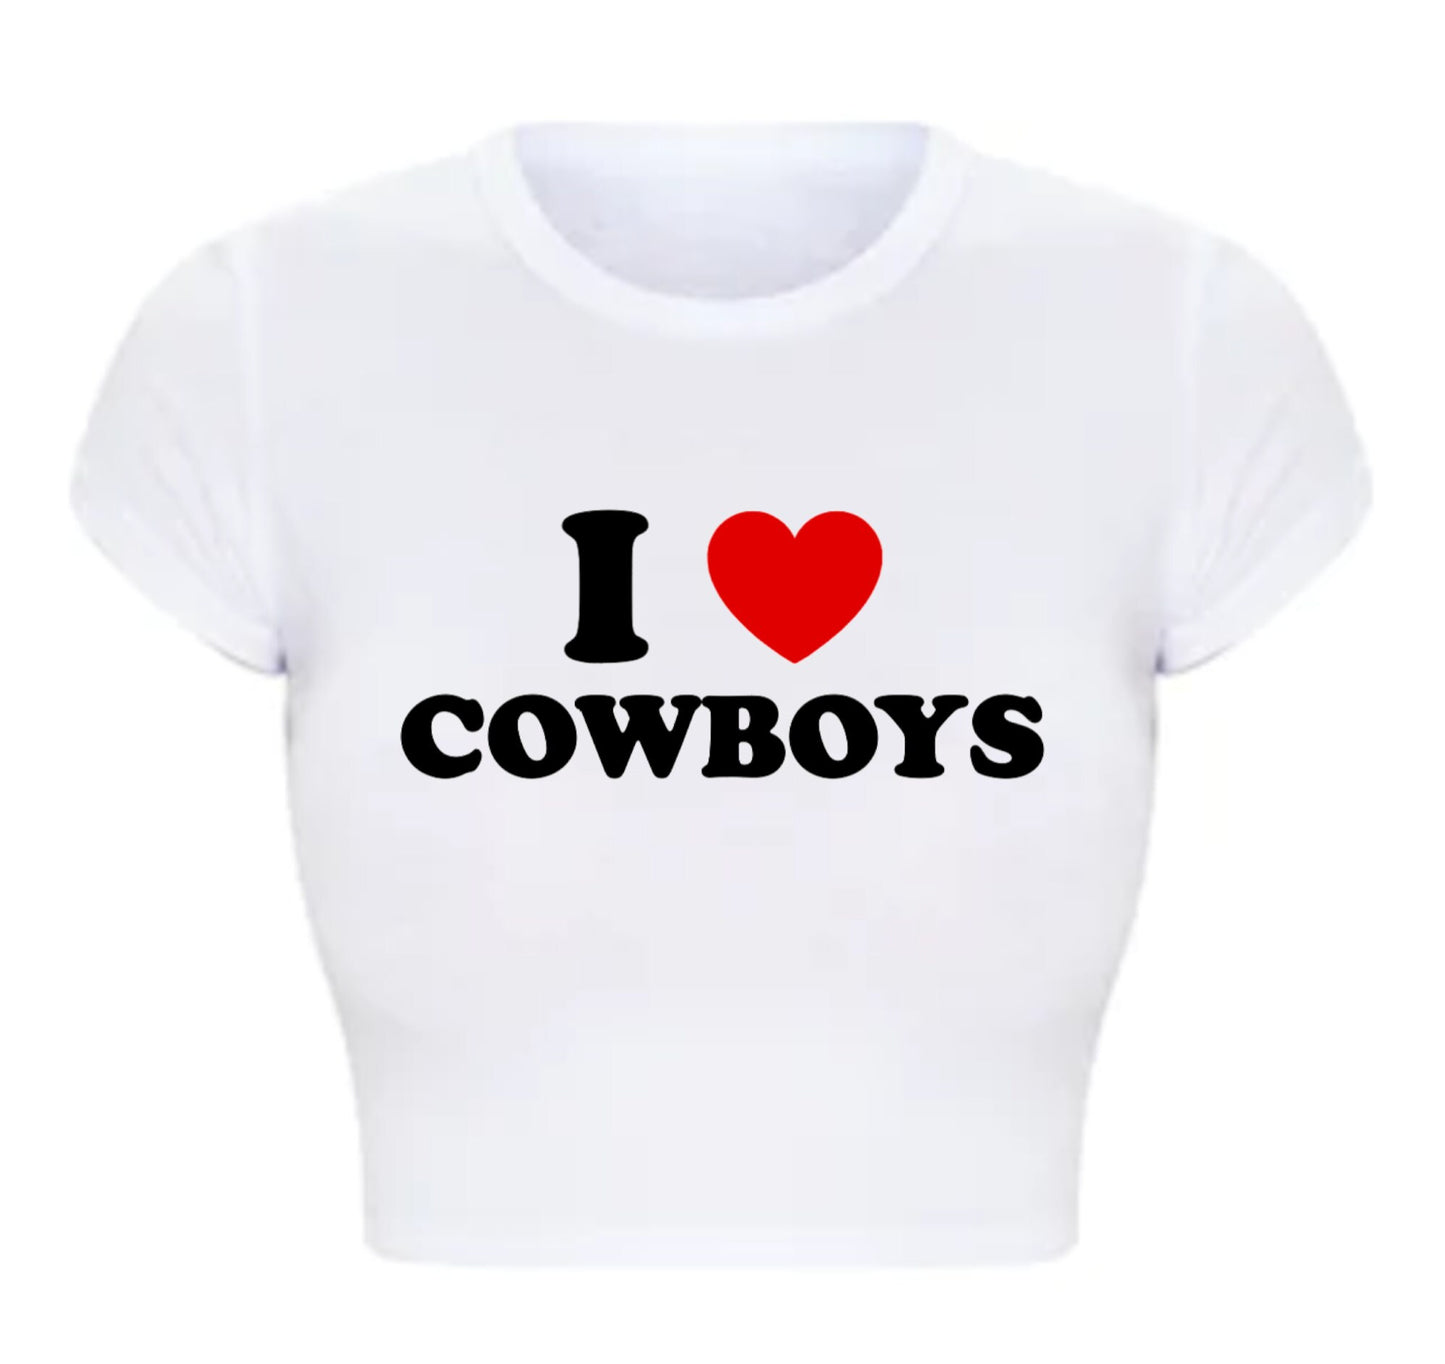 I Heart Cowboys Fitted Short Sleeve Crop Top